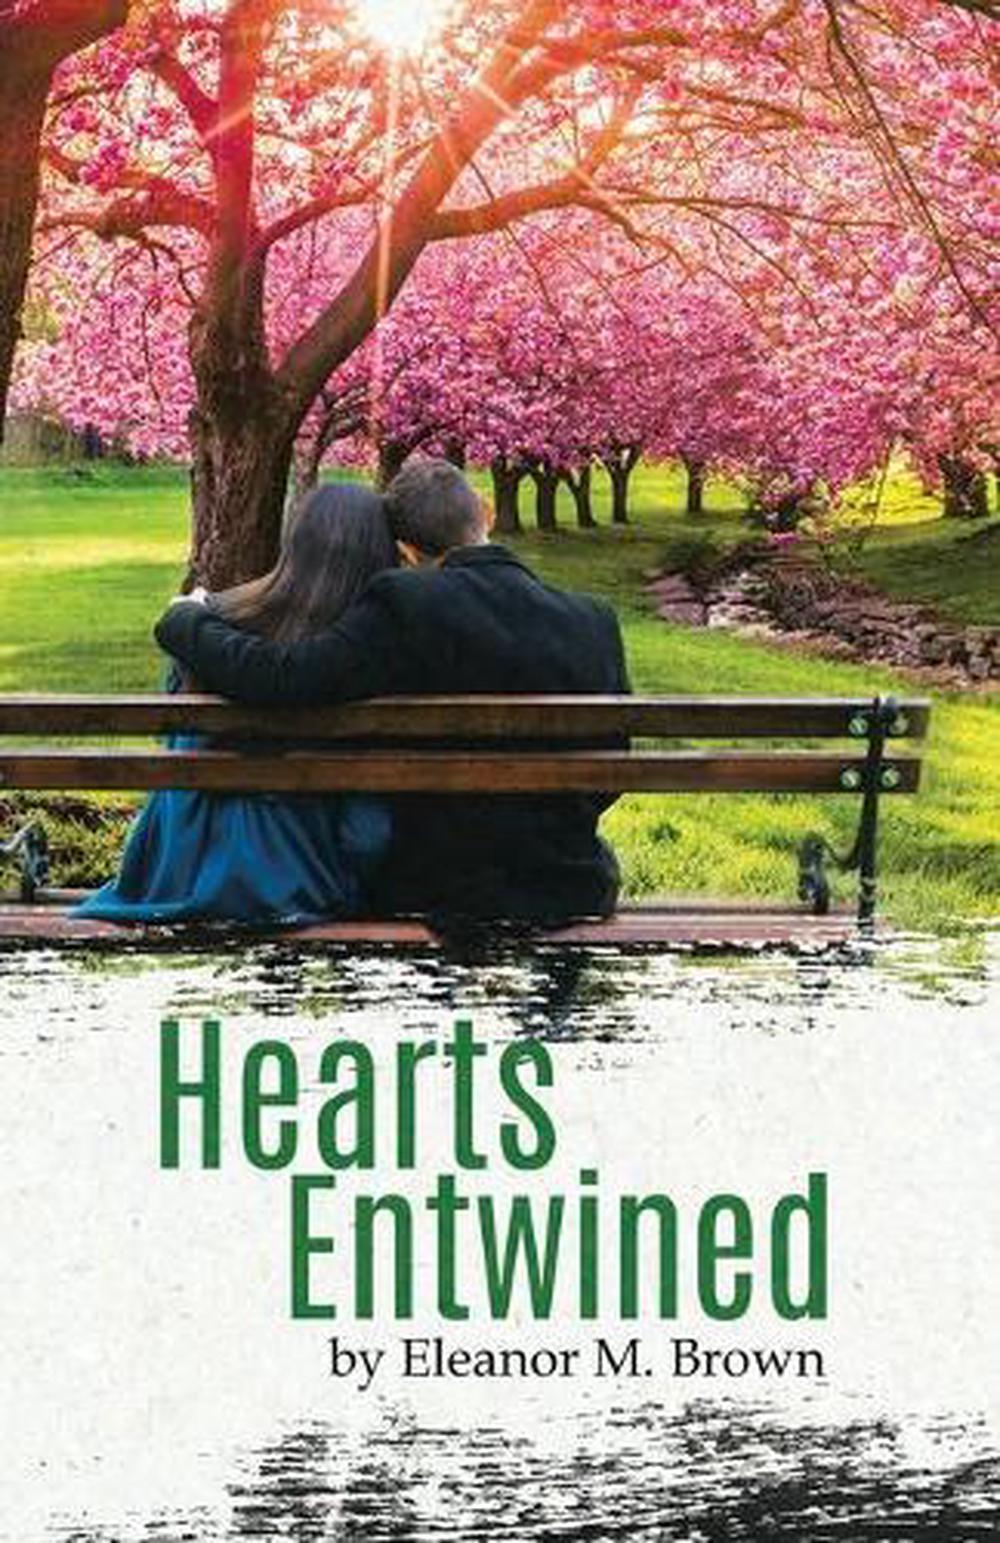 entwined with you full book online